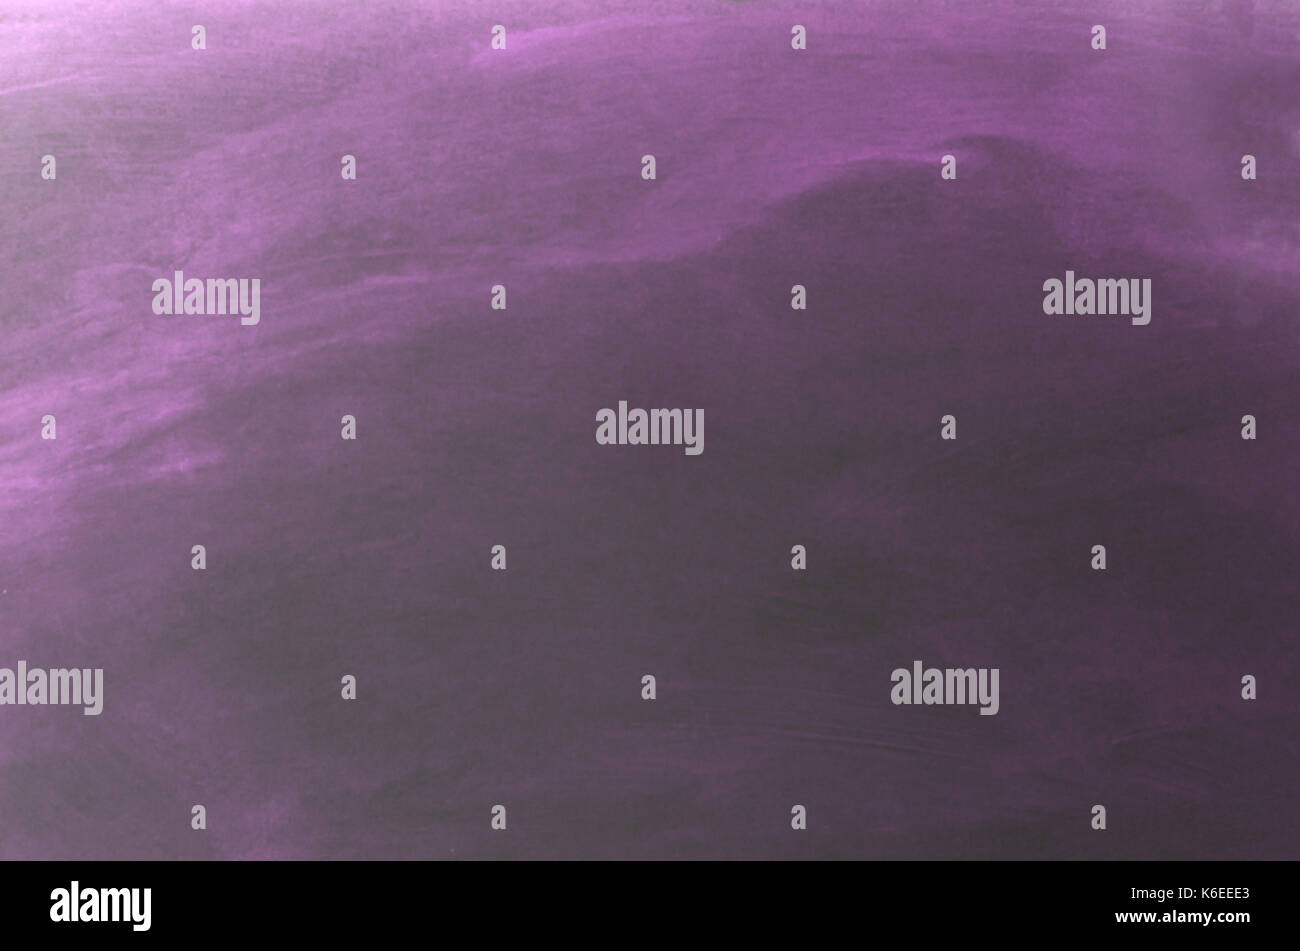 Abstract background with appearance of drifting mist or smoke in various shades of purple. Stock Photo